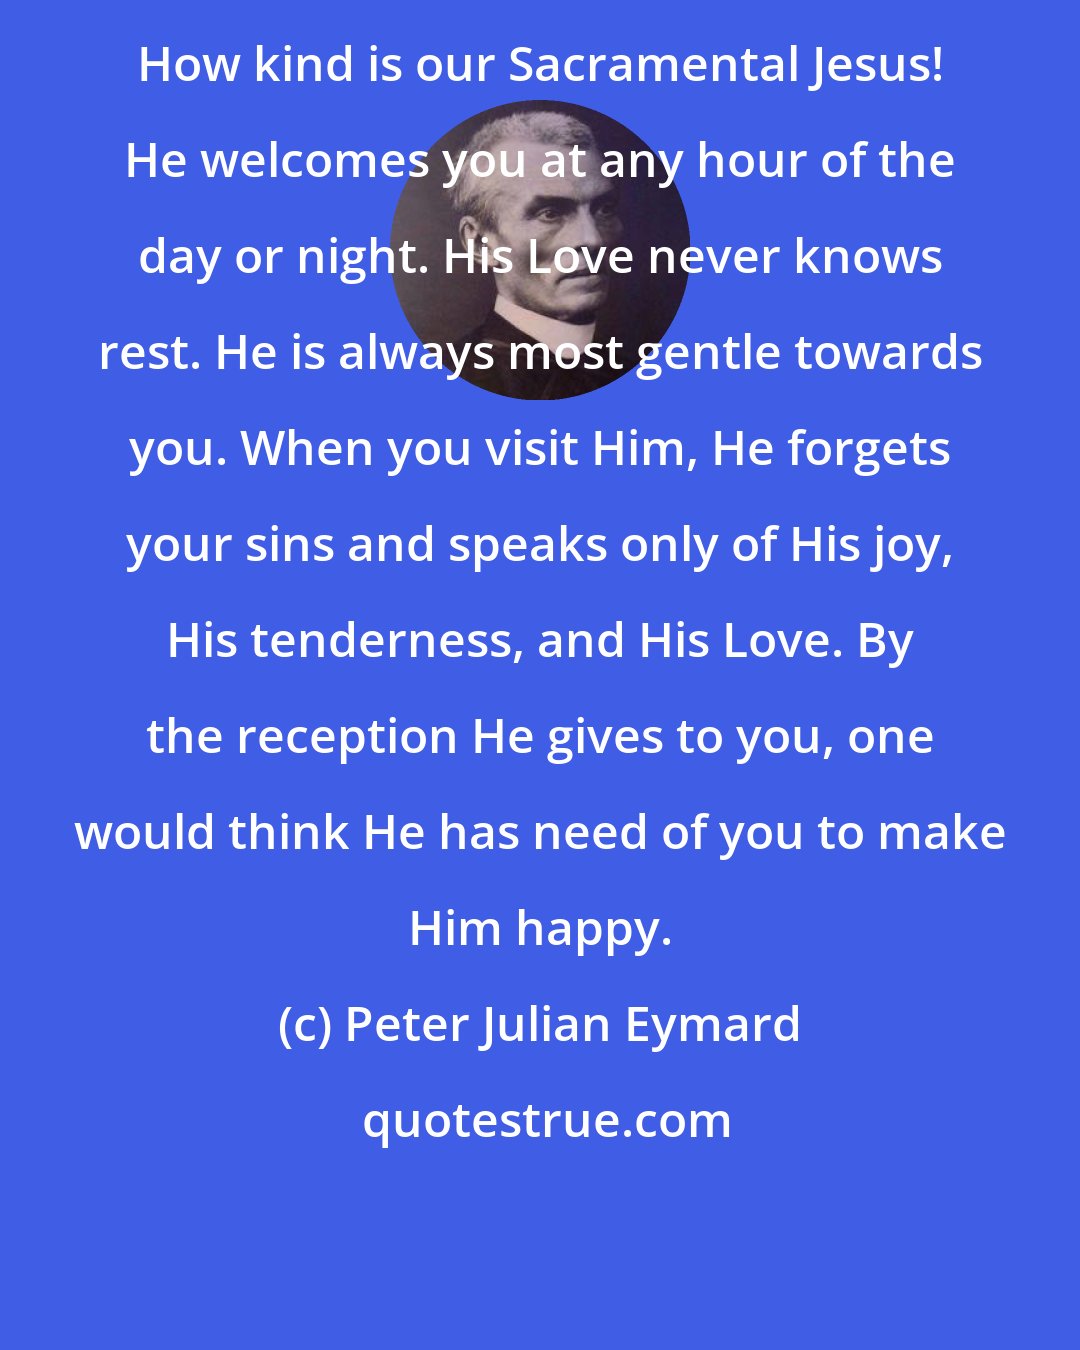 Peter Julian Eymard: How kind is our Sacramental Jesus! He welcomes you at any hour of the day or night. His Love never knows rest. He is always most gentle towards you. When you visit Him, He forgets your sins and speaks only of His joy, His tenderness, and His Love. By the reception He gives to you, one would think He has need of you to make Him happy.